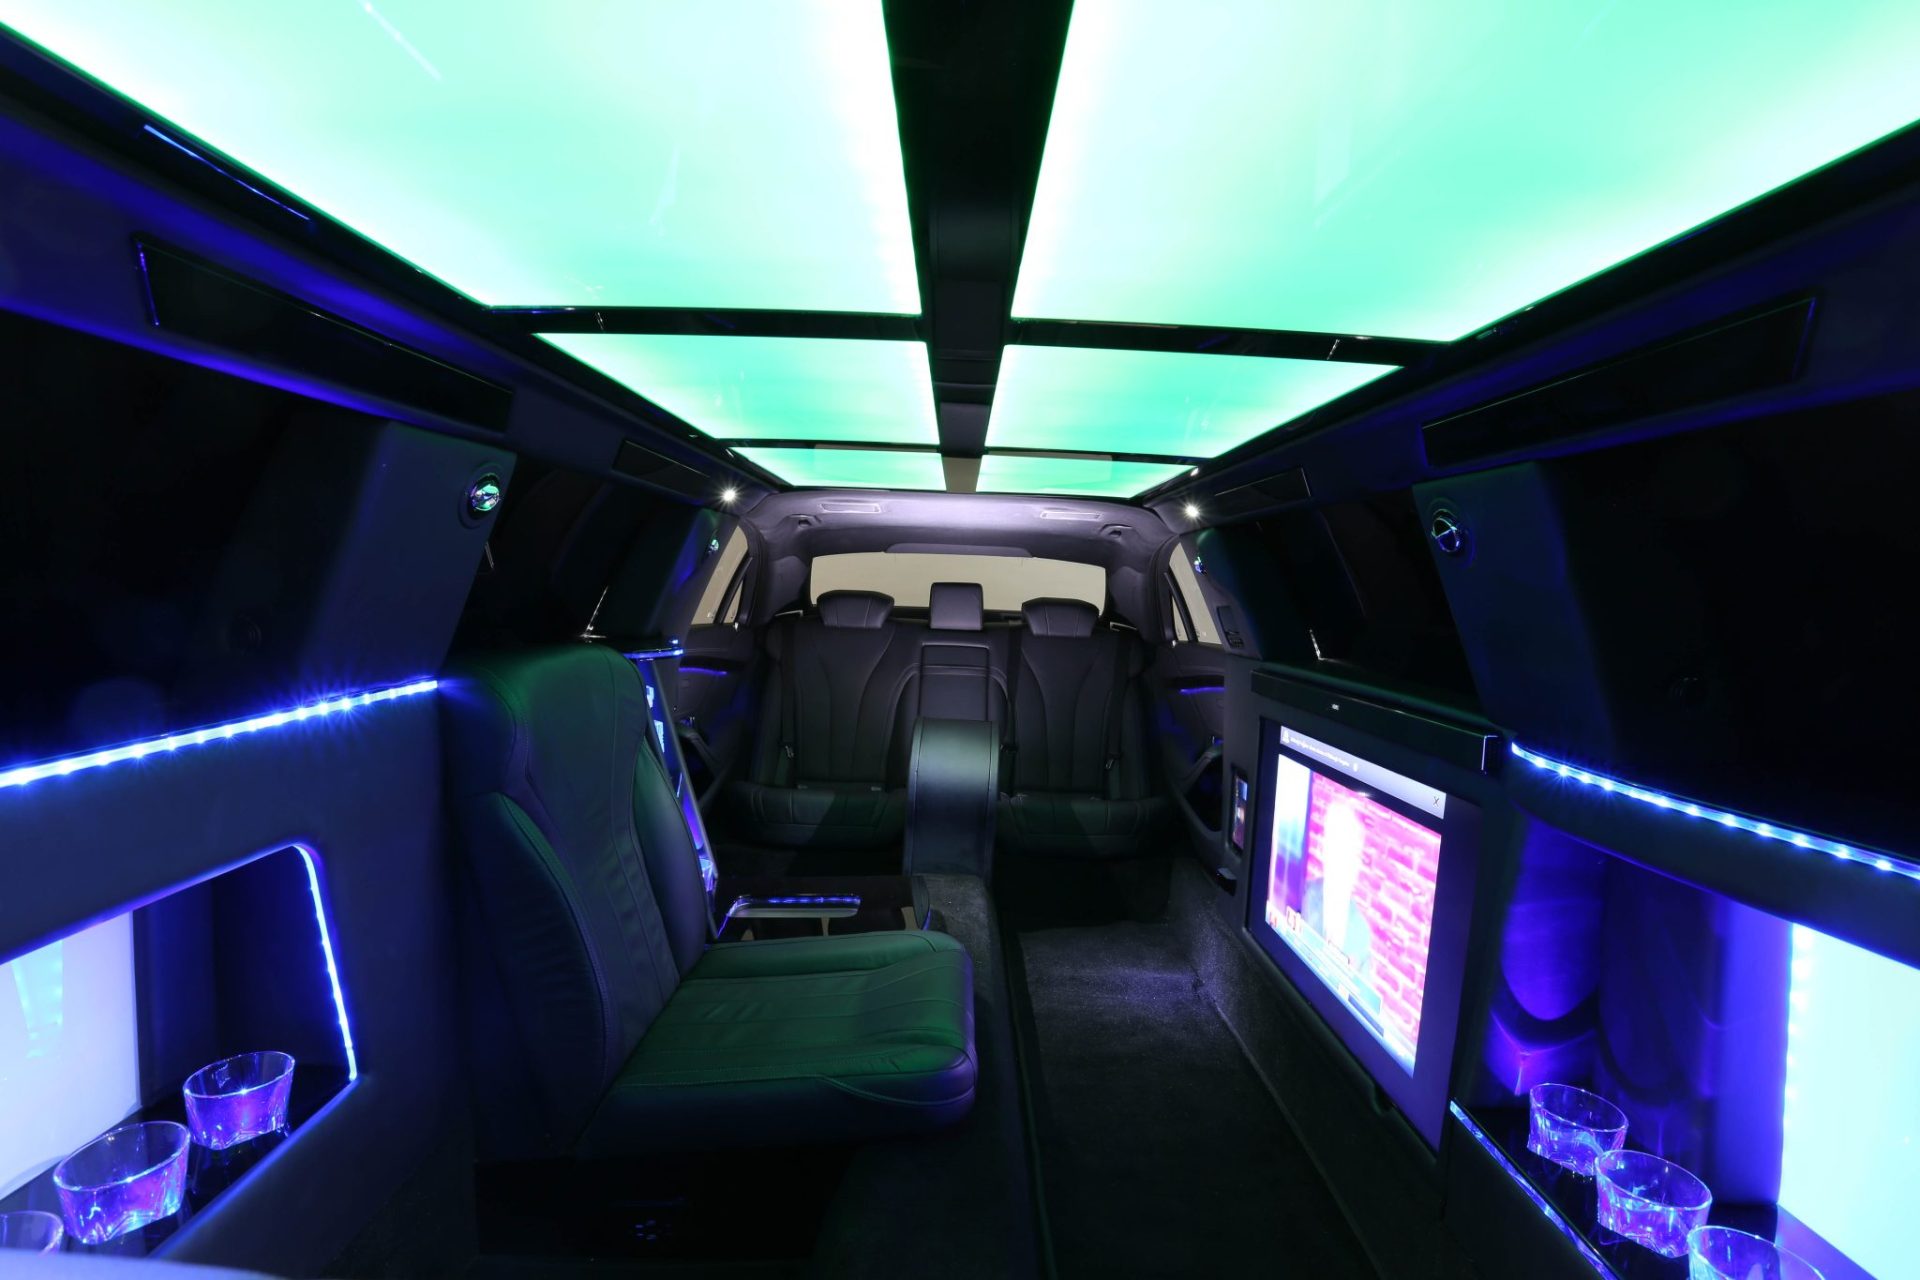 Mercedes Benz S-Class Stretched Limousine - Interior Photo #38